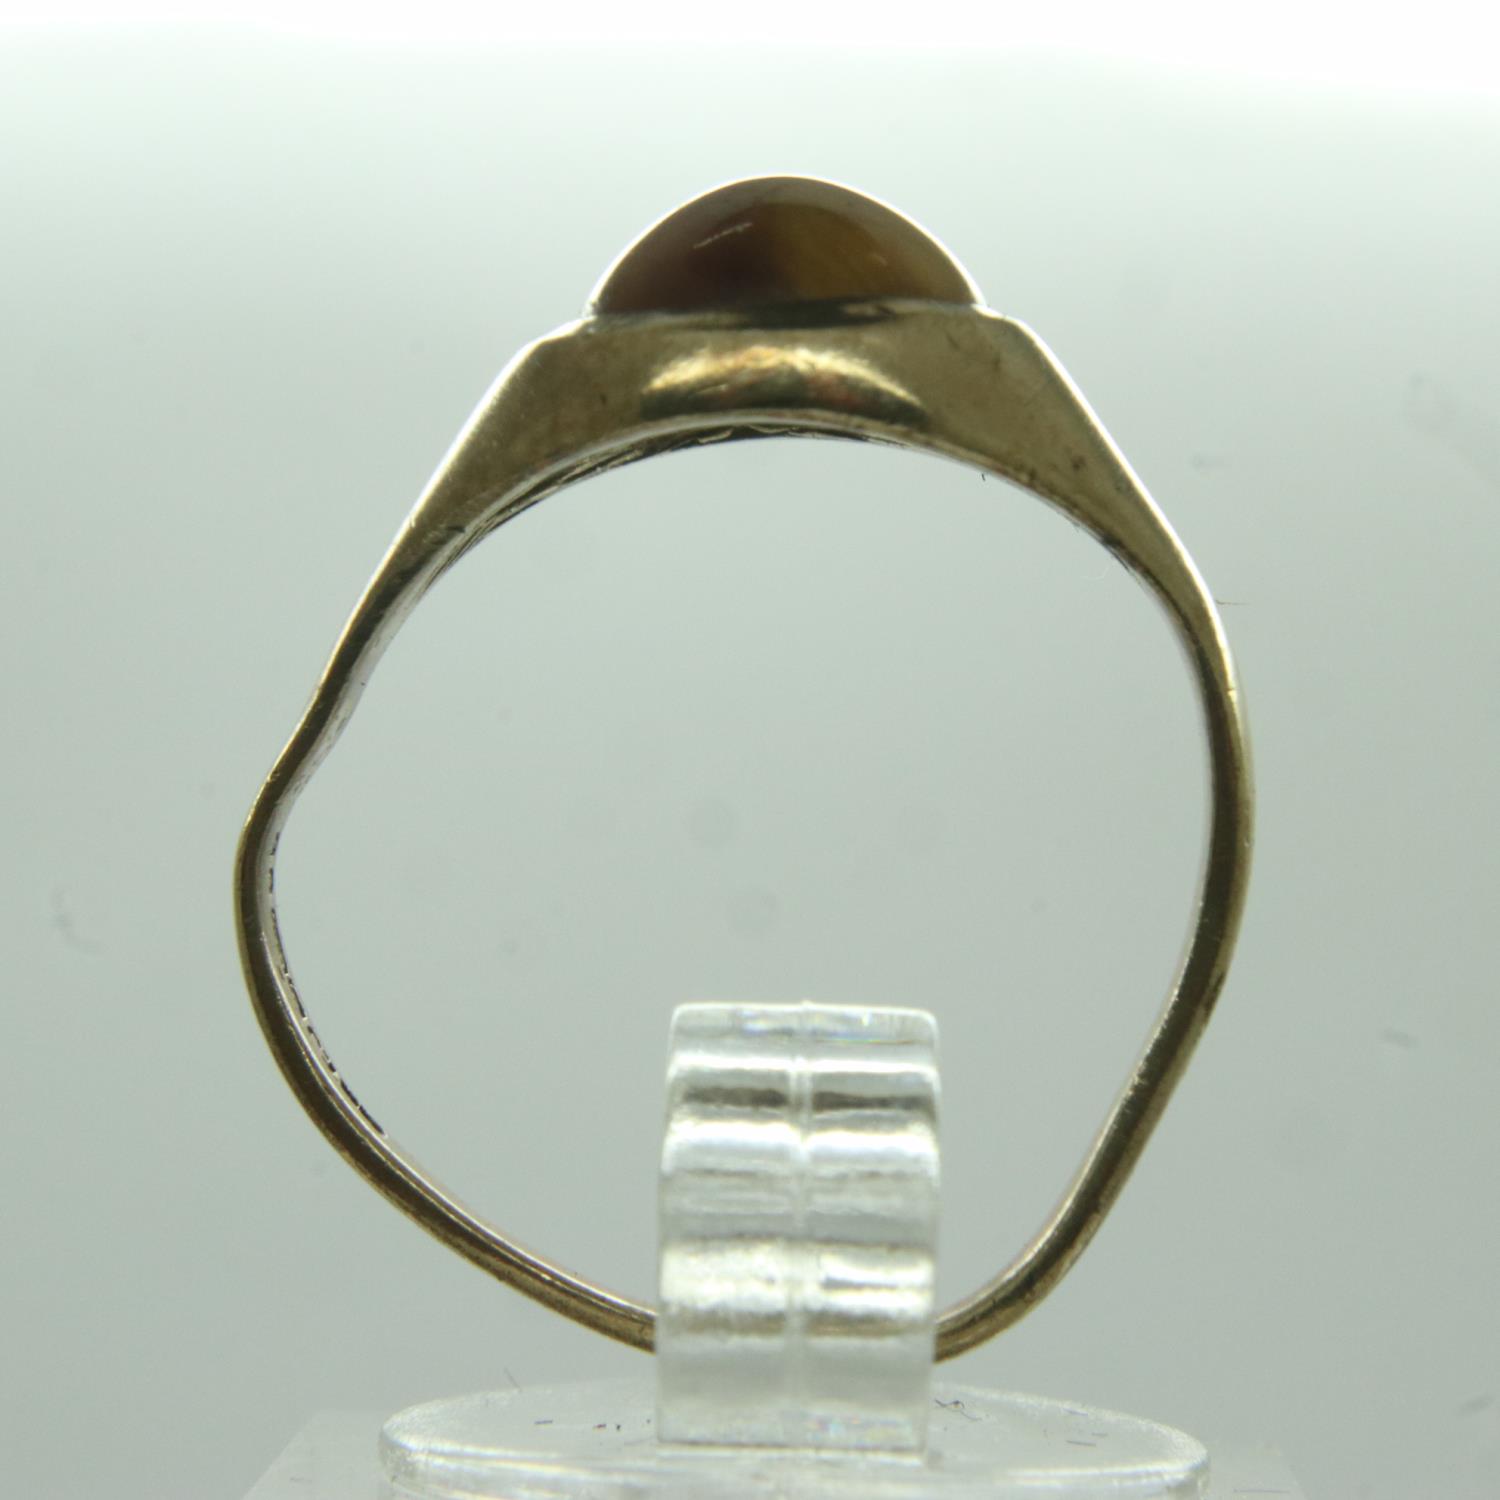 9ct gold gents ring set with tigers eye cabochon, misshapen, 2.5g. UK P&P Group 0 (£6+VAT for the - Image 2 of 3